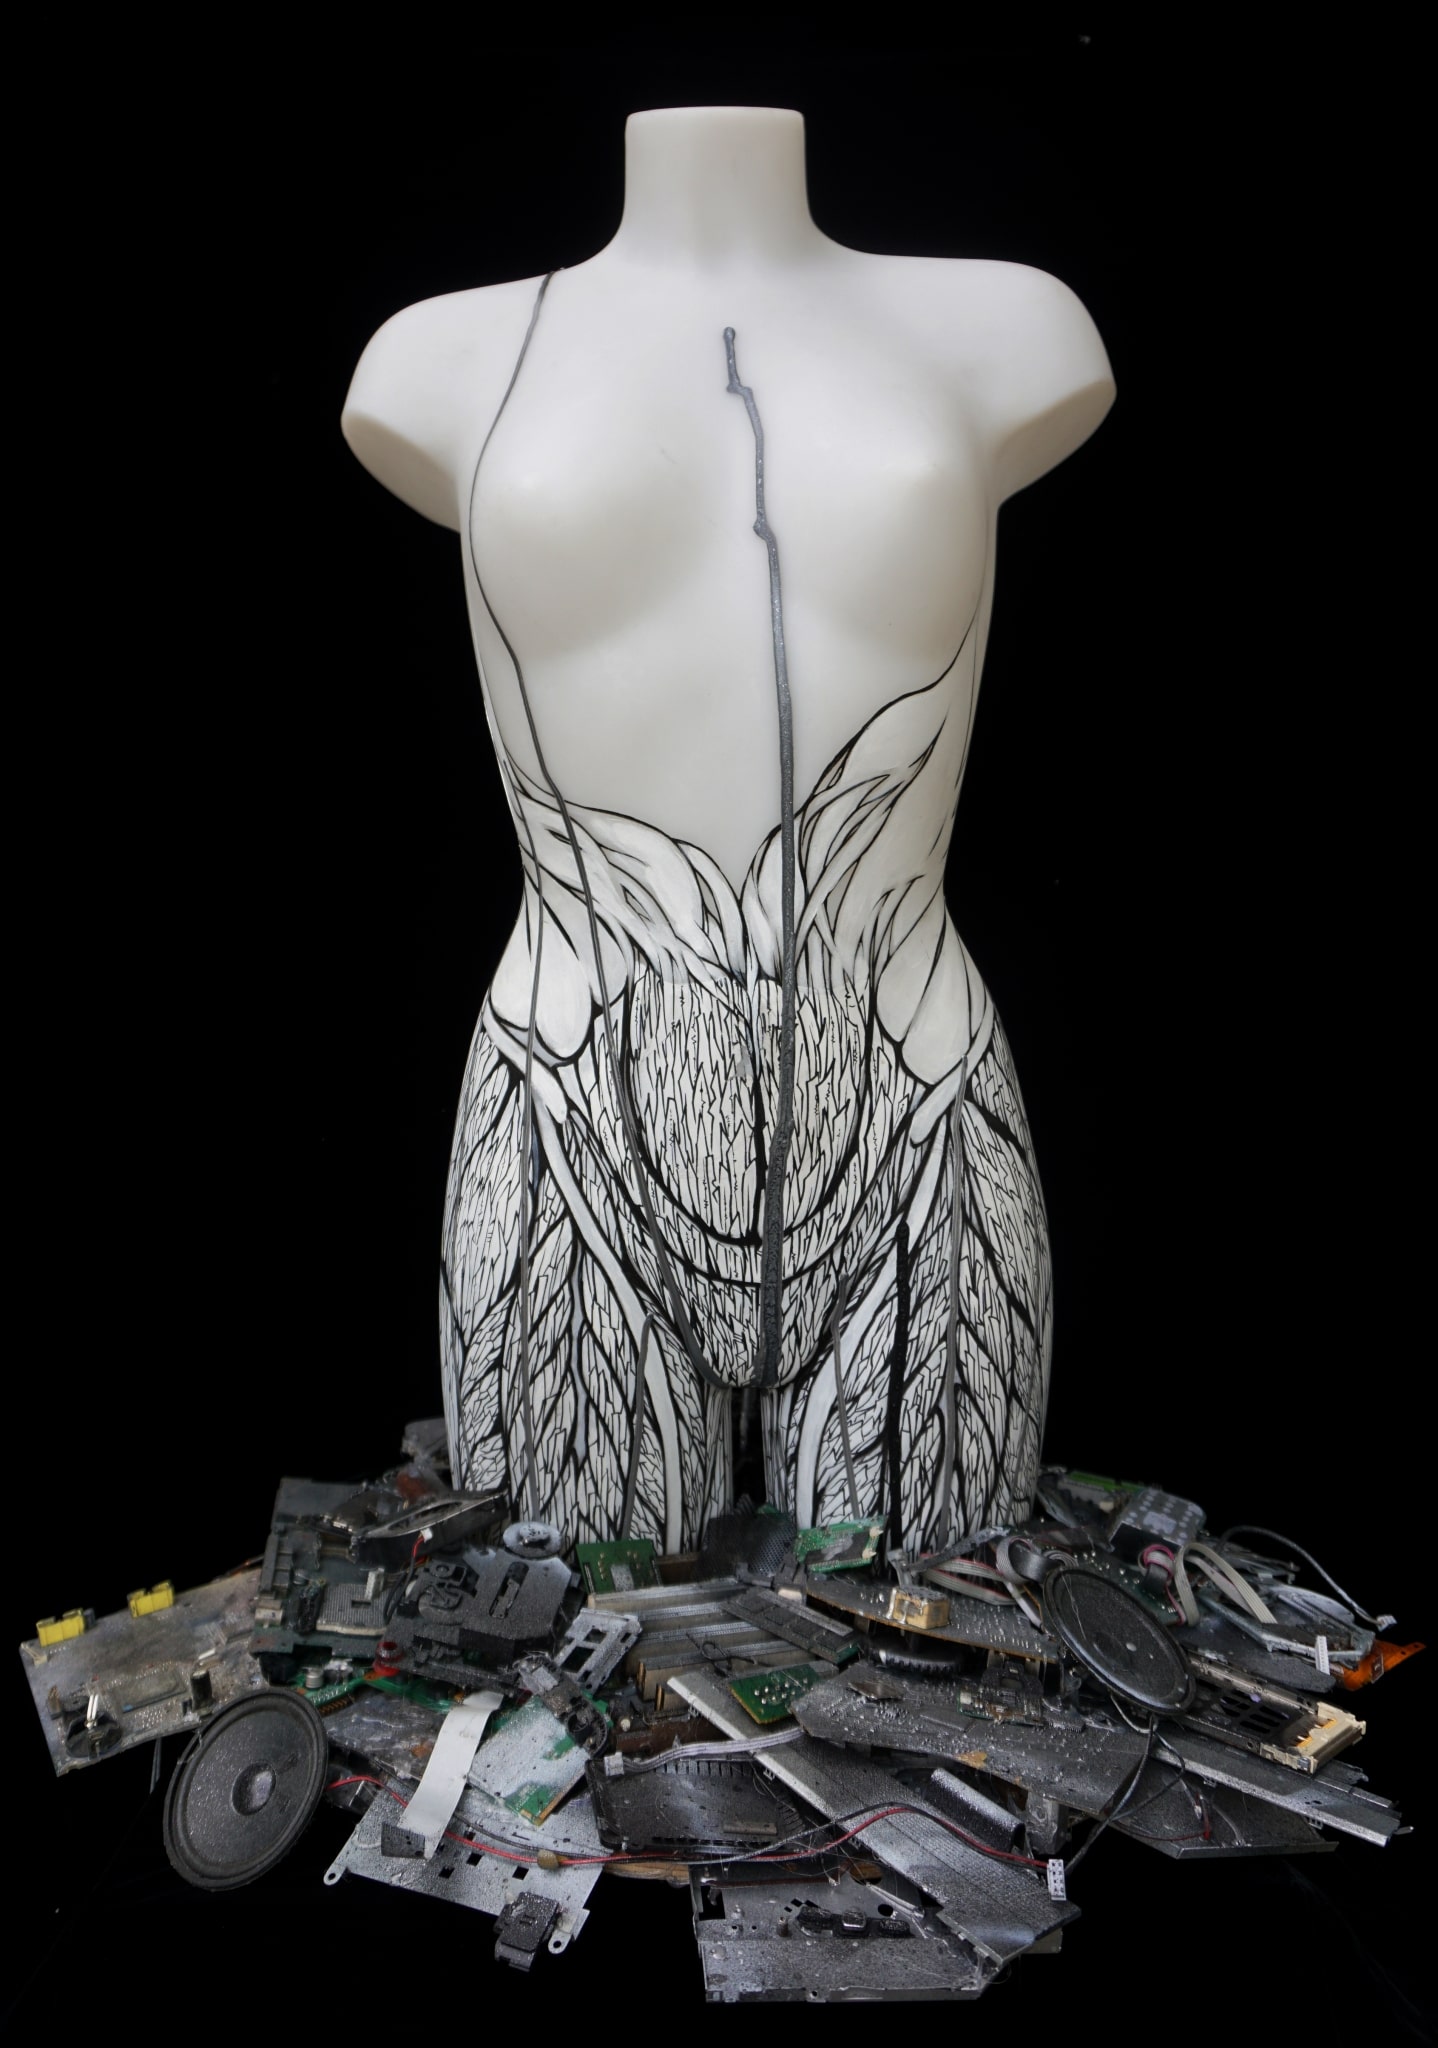 Eve-future-installation-ecological cyberpunk-sculpture-by-marie-catherine arrighi inspired by Villiers de L'Isle Adam